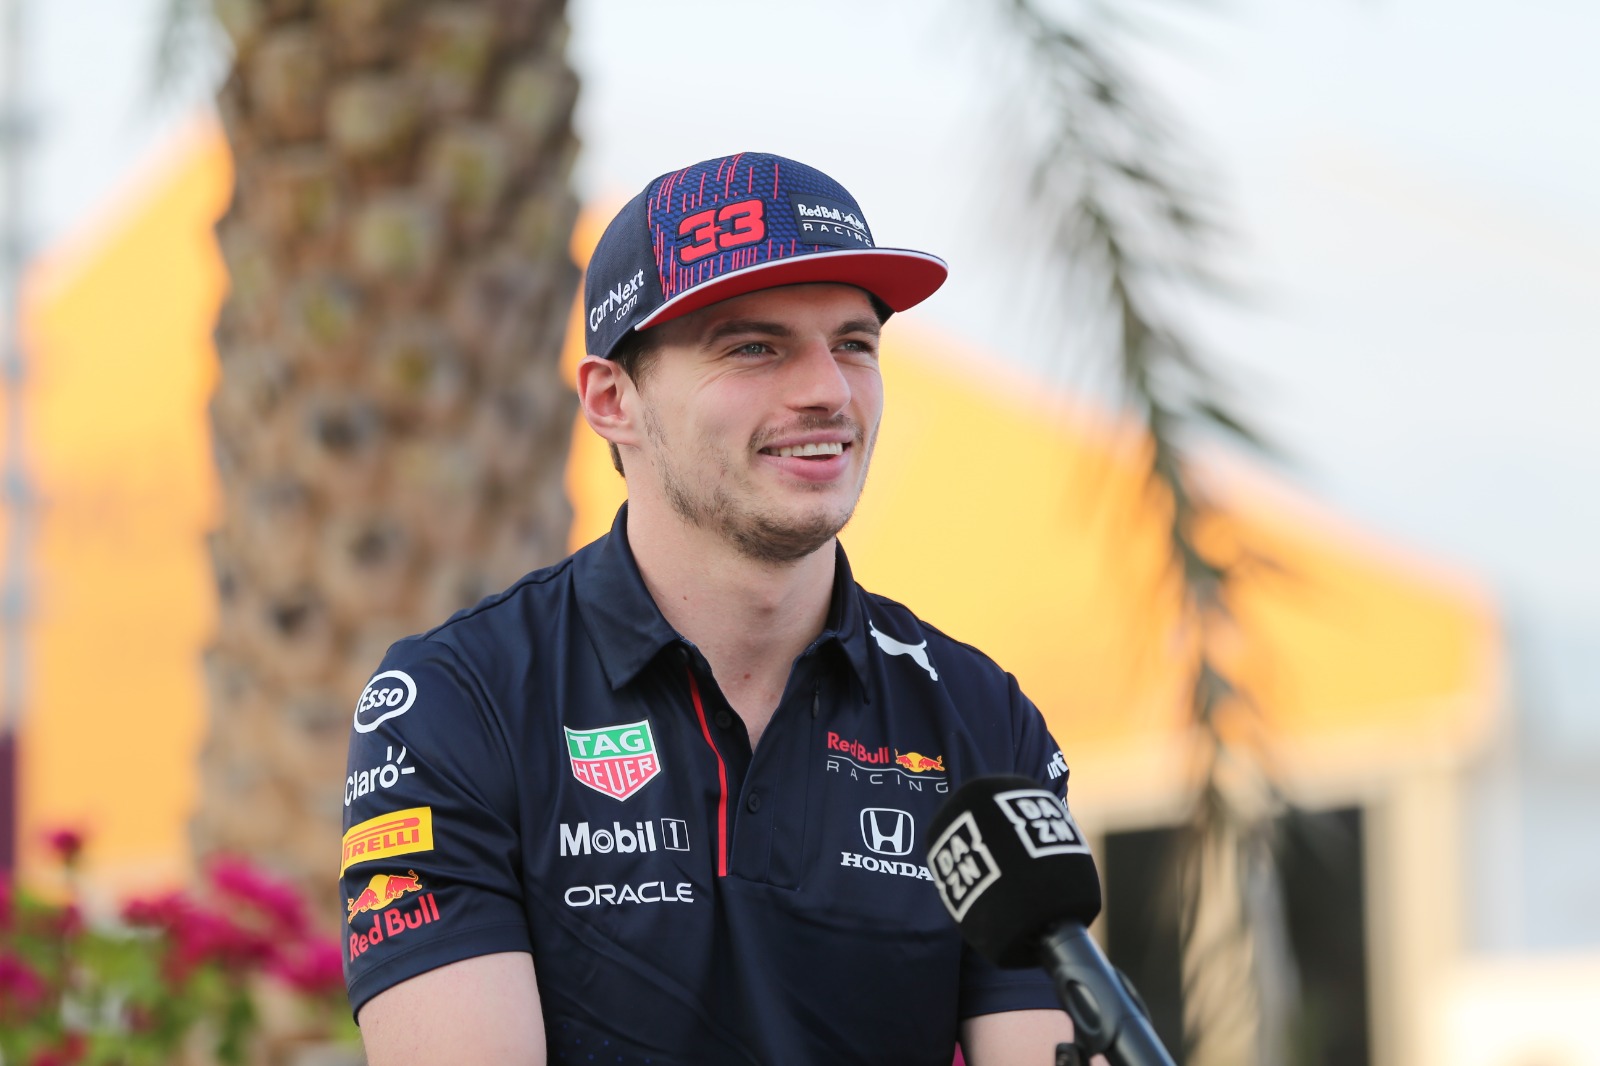 WHO SAID WHAT : “It’s a cool track” - F1 drivers in Qatar have their say